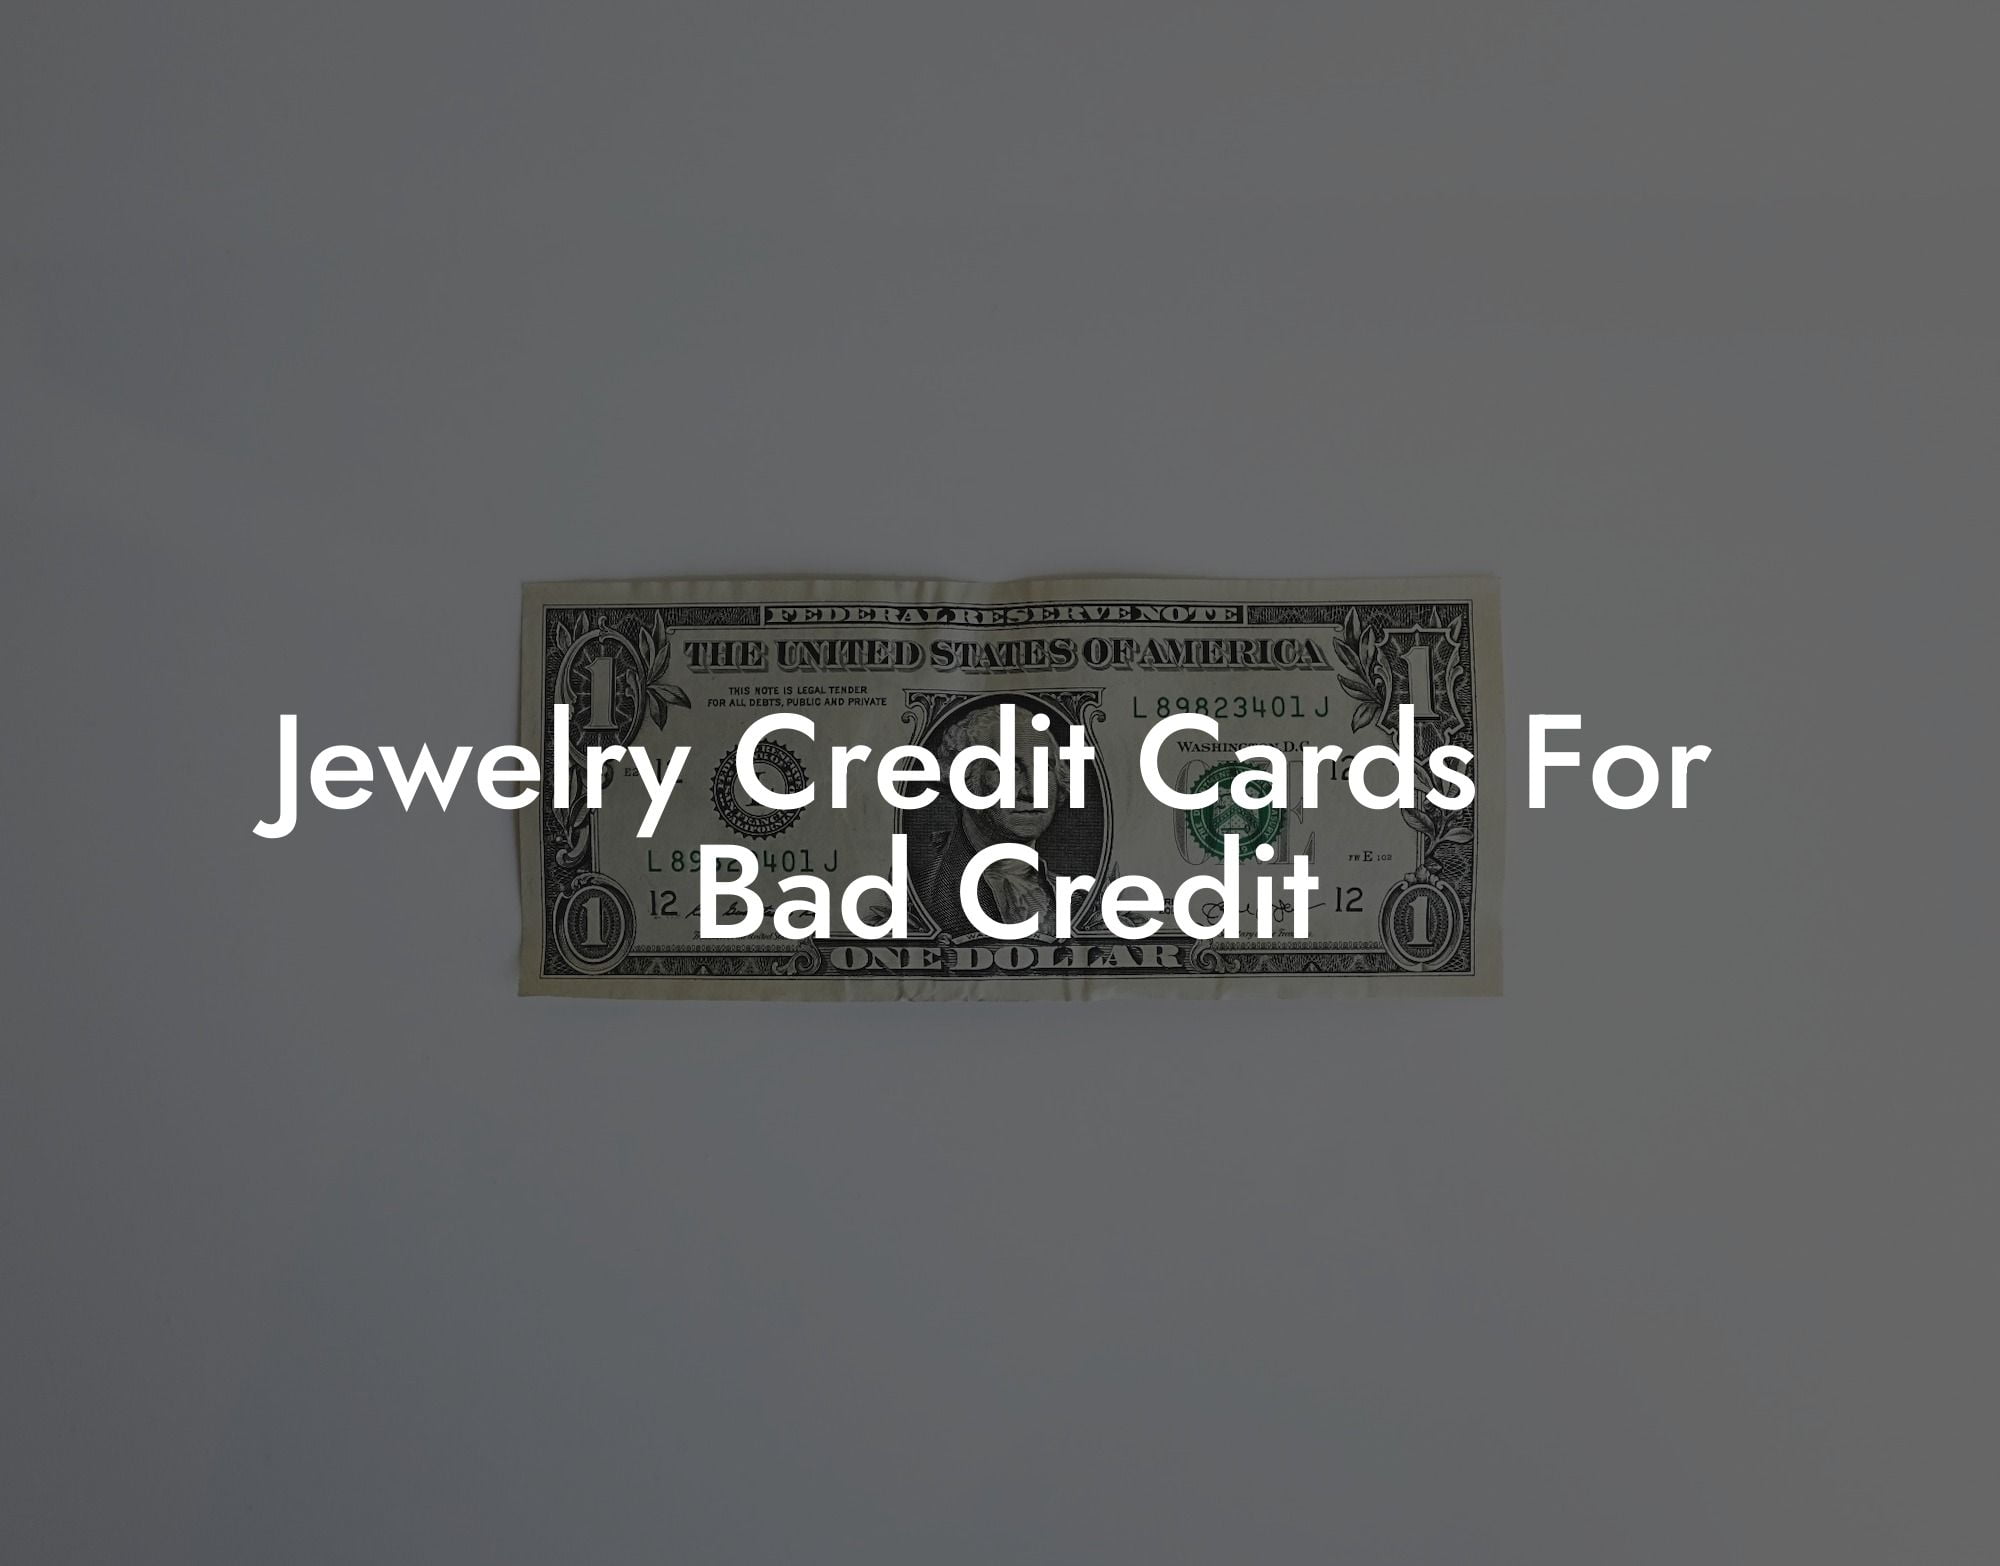 Jewelry Credit Cards For Bad Credit